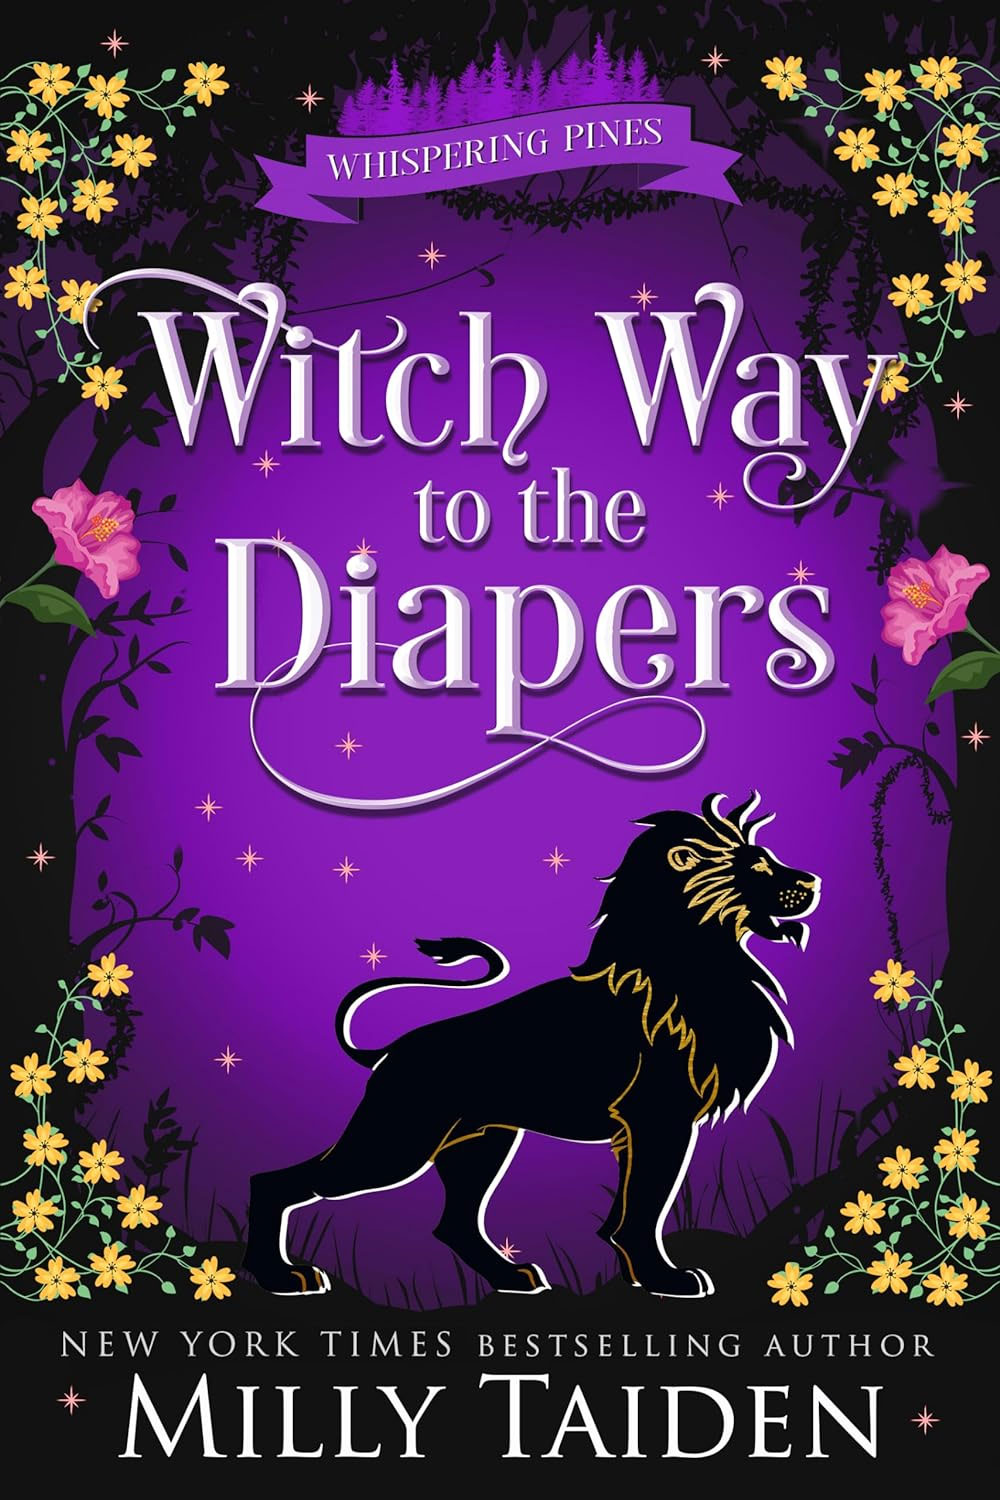 Witch Way to the Diapers